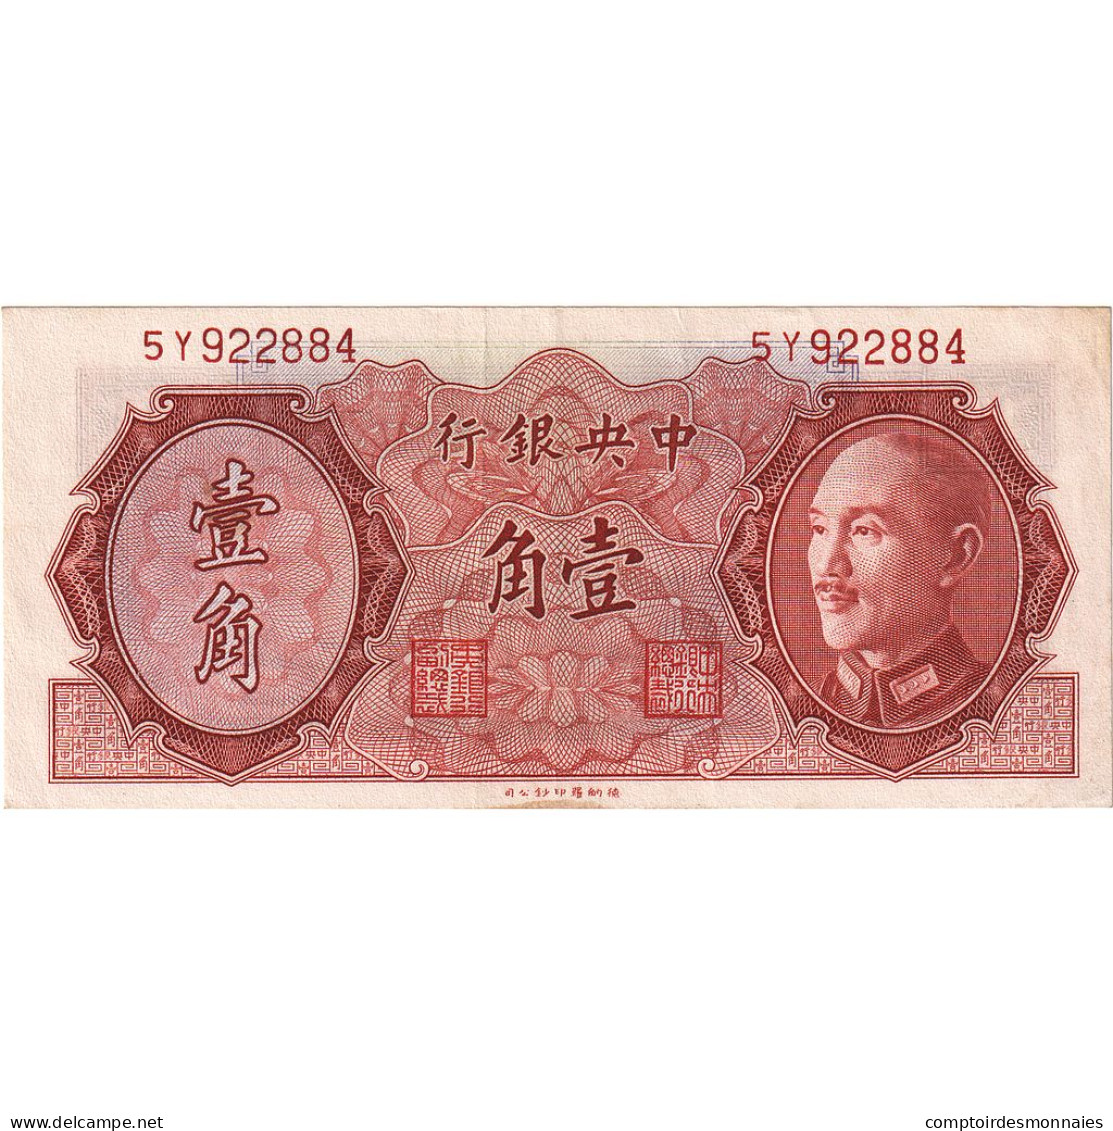 Billet, Chine, 10 Cents, 1946, KM:395, SUP - China